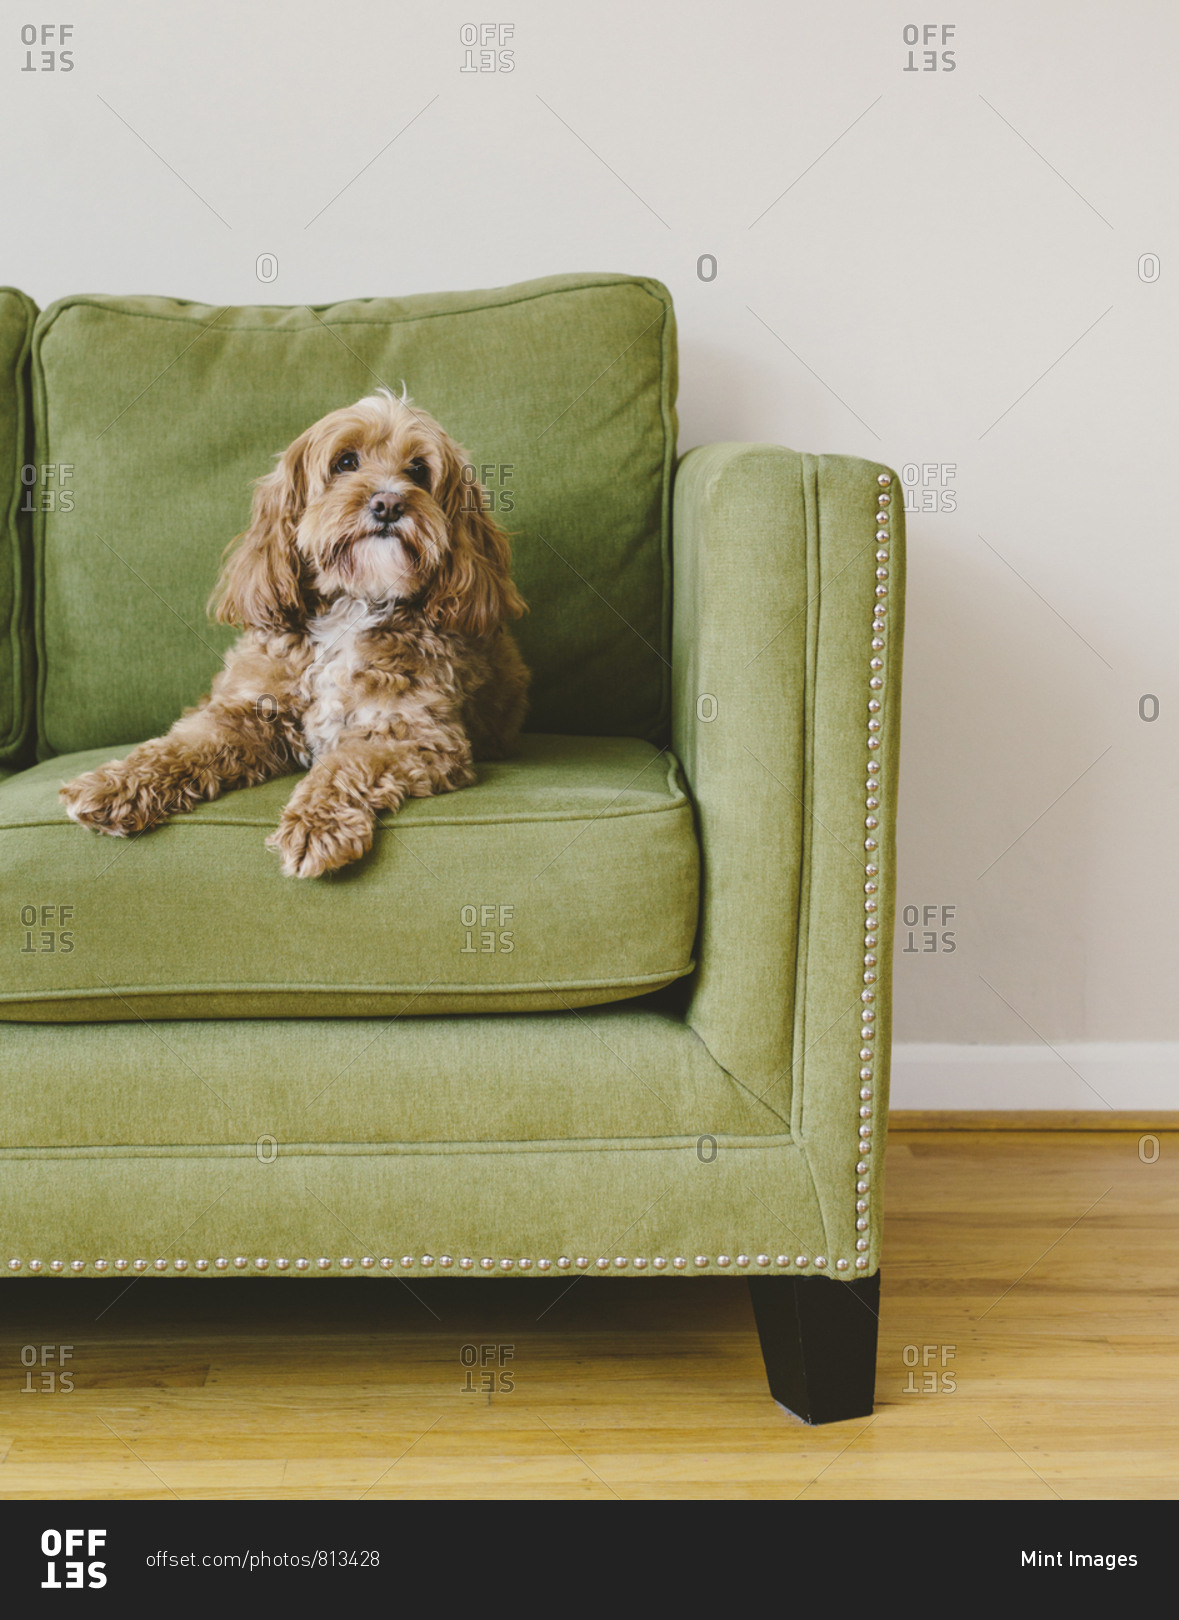 A cockapoo mixed breed dog, a cocker spaniel poodle cross, a family pet with brown curly coat sitting on a chair